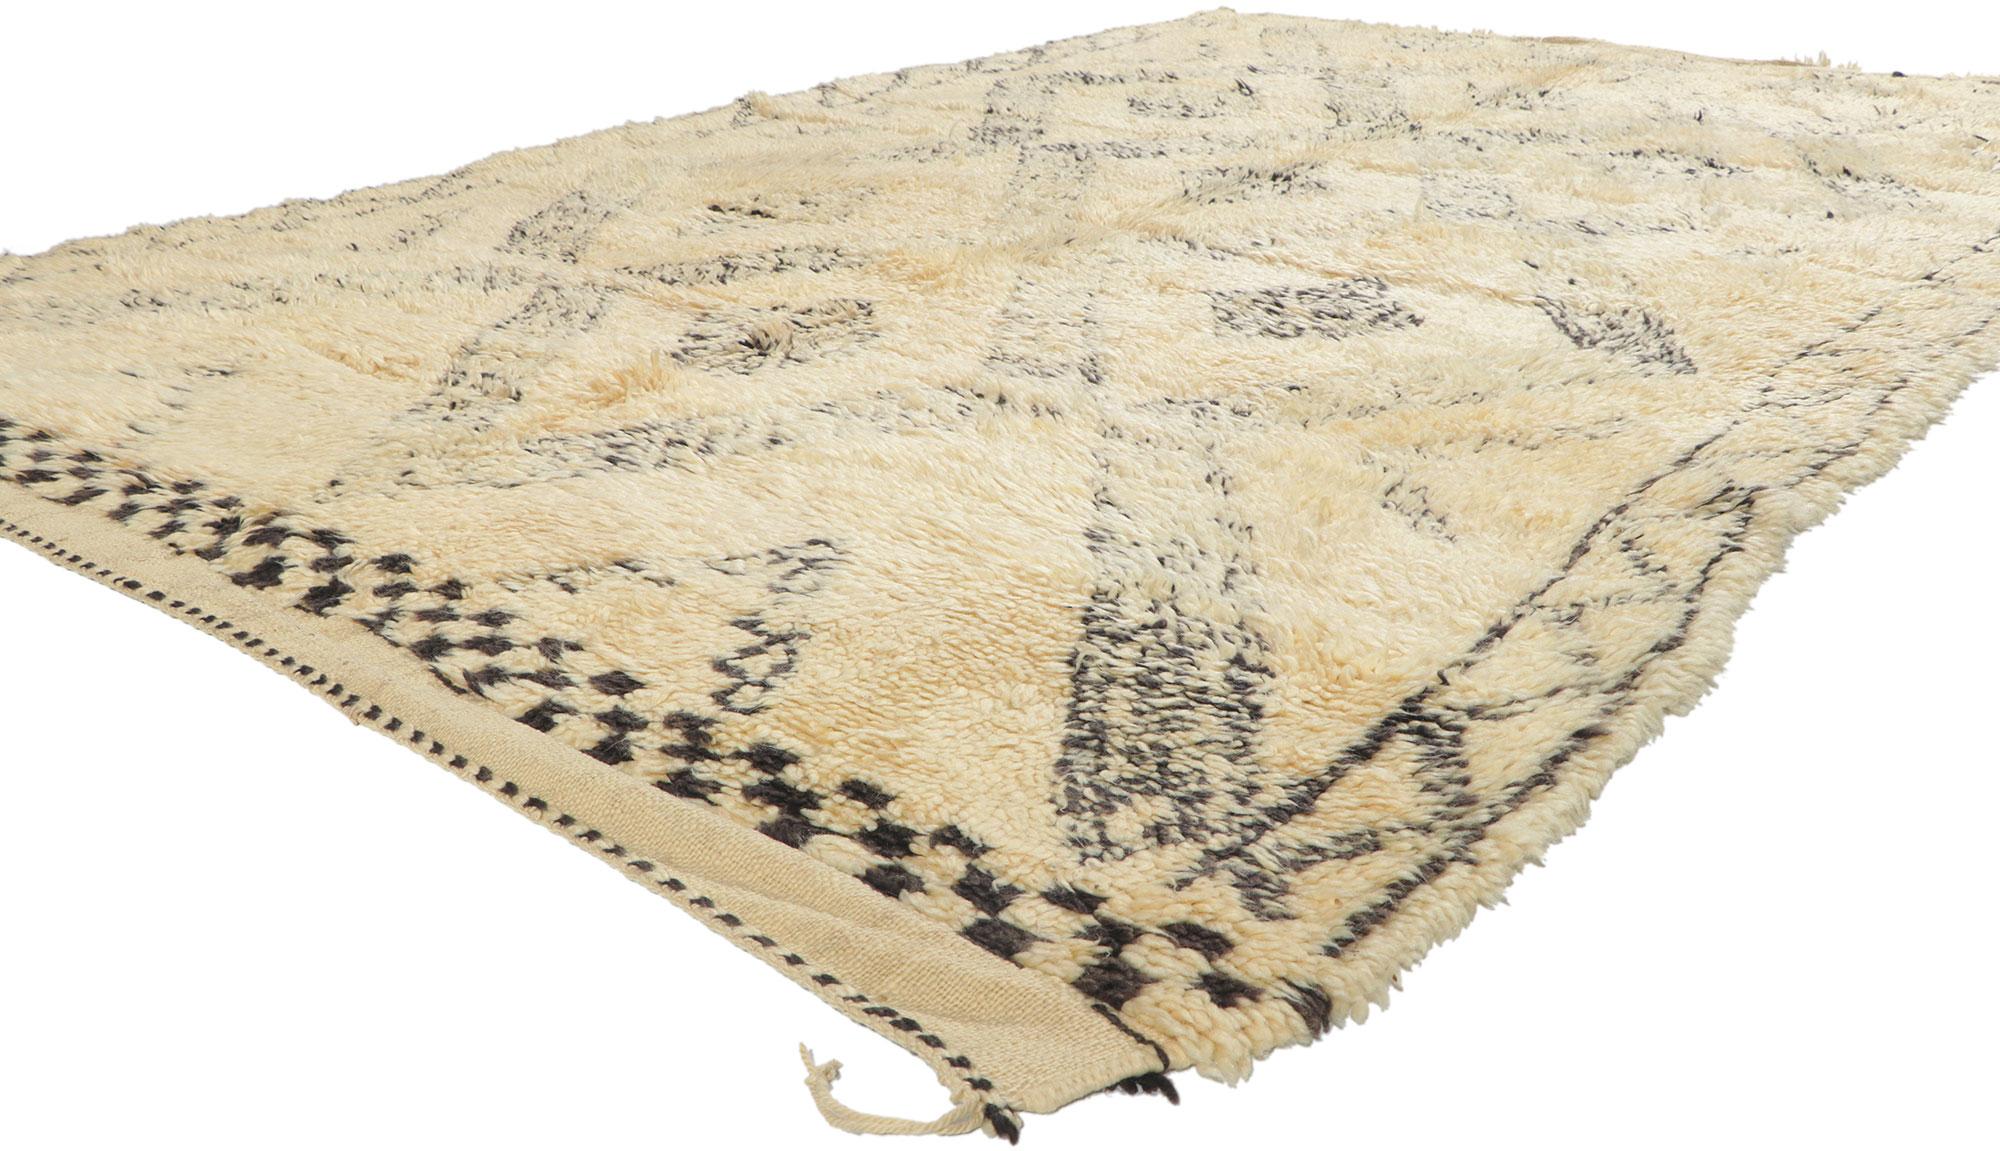 78384 Vintage Moroccan Beni Ourain rug, 06'05 x 09'09. With its simplicity, plush pile, incredible detail and texture, this hand knotted wool vintage Beni Ourain Moroccan rug is a captivating vision of woven beauty. The eye-catching diamond trellis